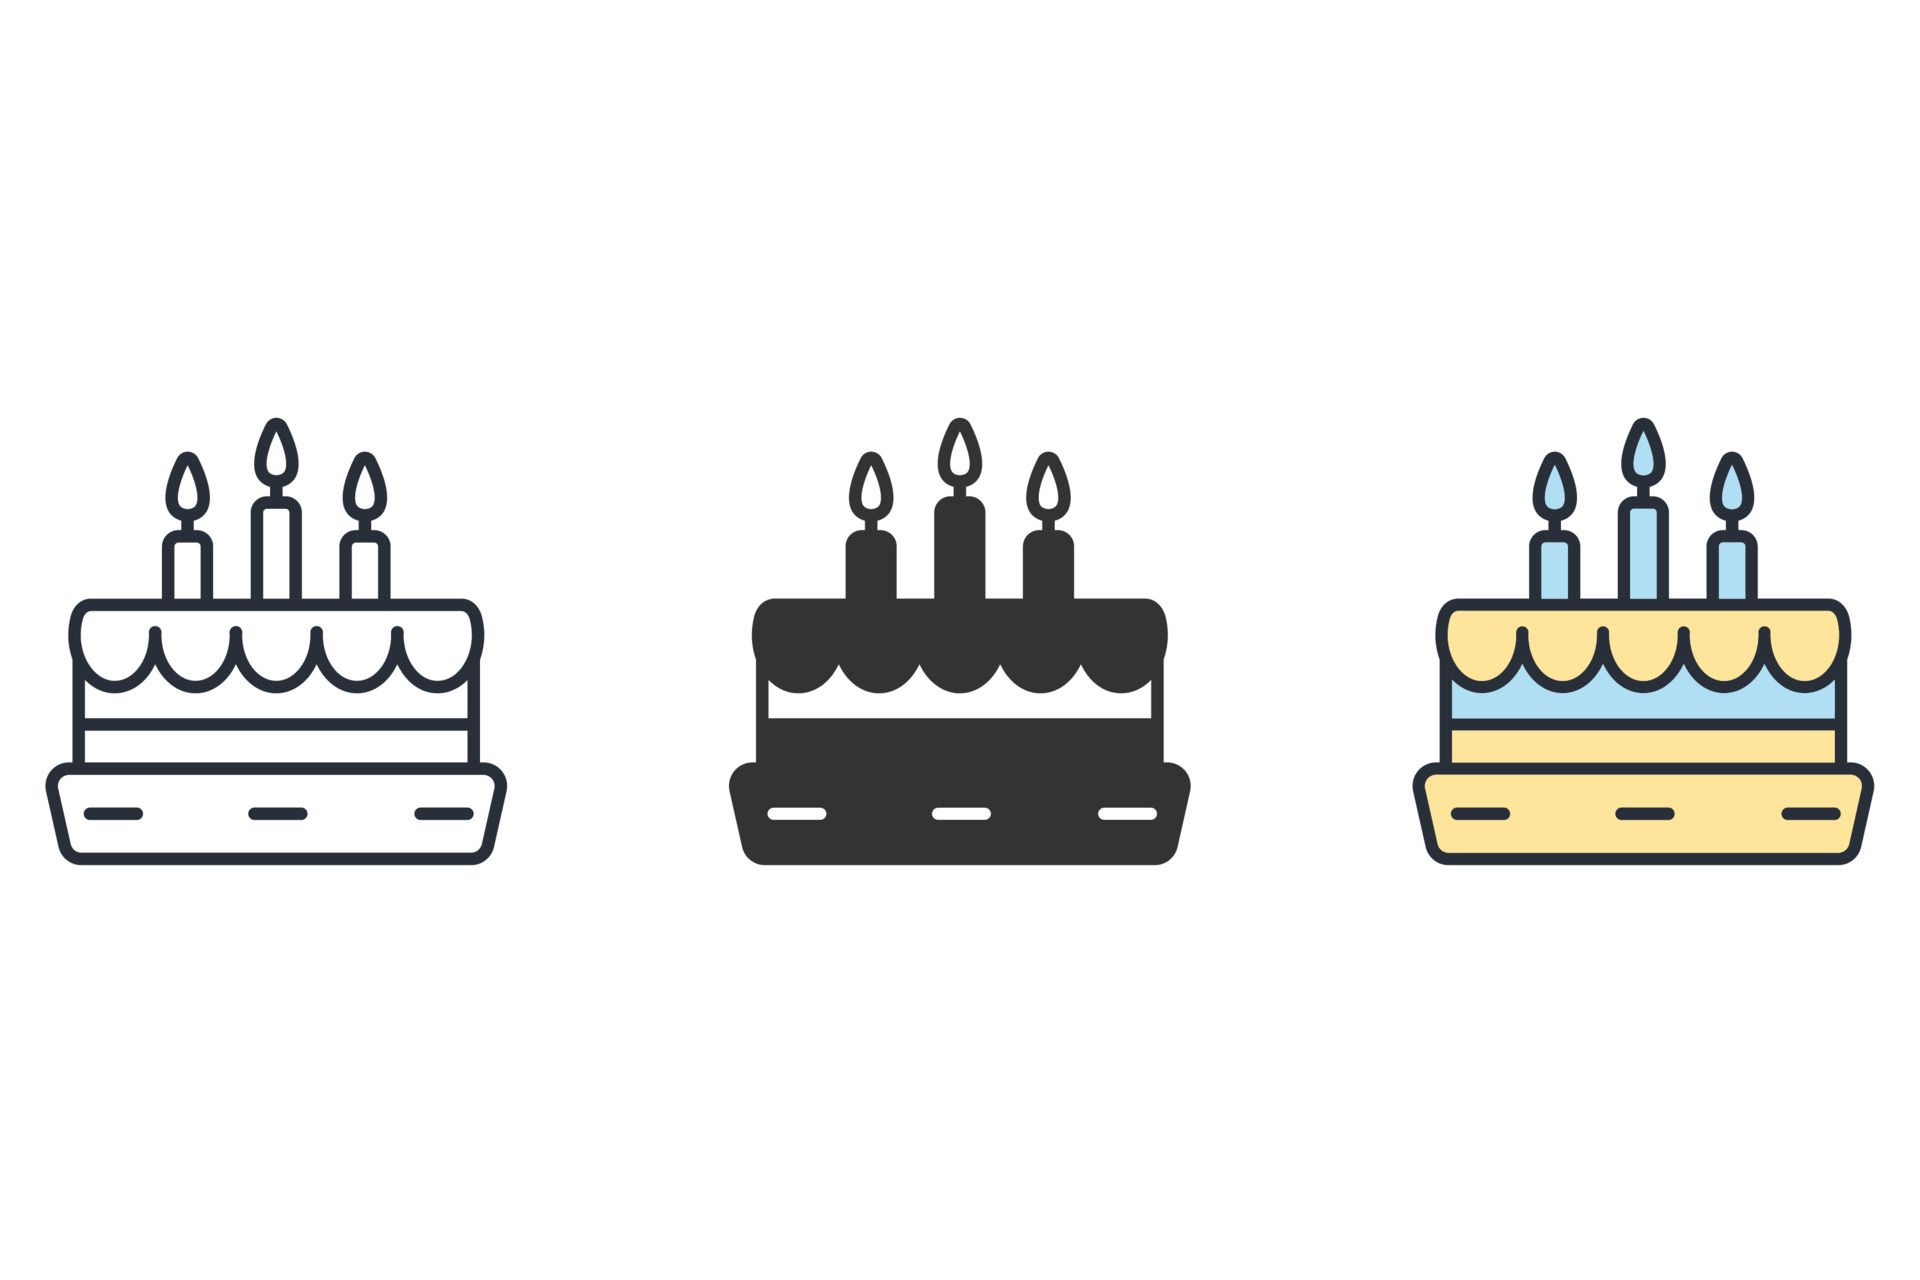 The Birthday Cake with Candles in the Form of Number 25 Icon. Birthday  Symbol Stock Vector - Illustration of celebration, icon: 79863895